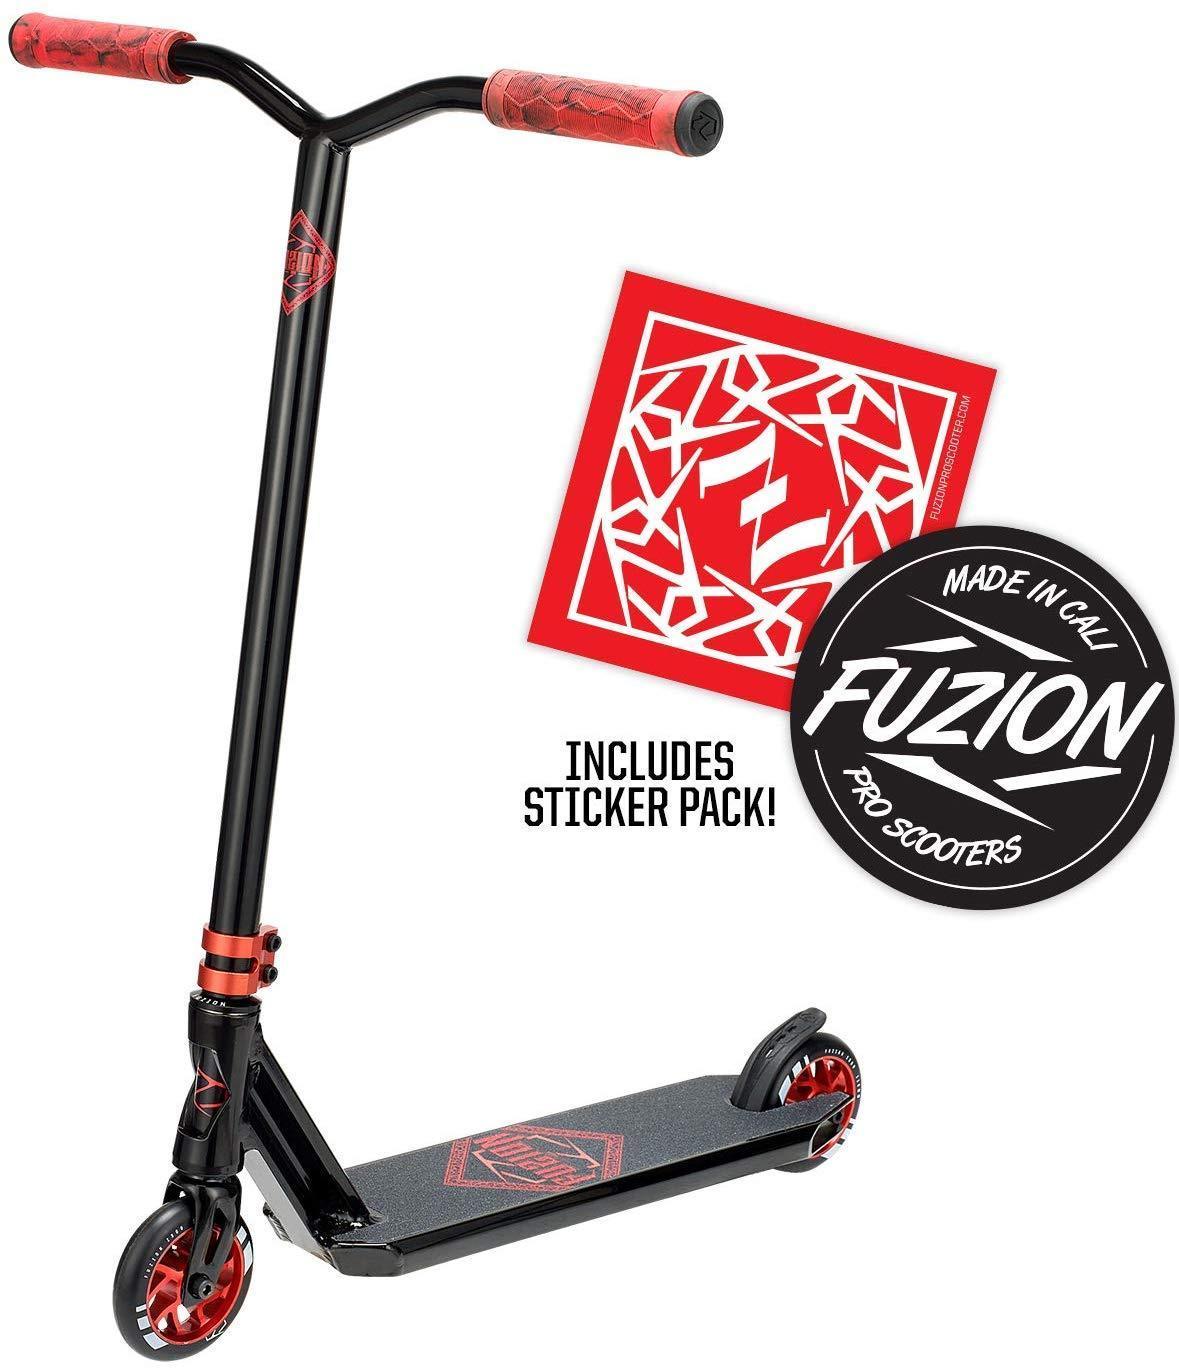 Fuzion Z300 Pro Scooter Complete Trick Scooter -Stunt Scooters (2020 - Black/Red) - $149.99 MSRP